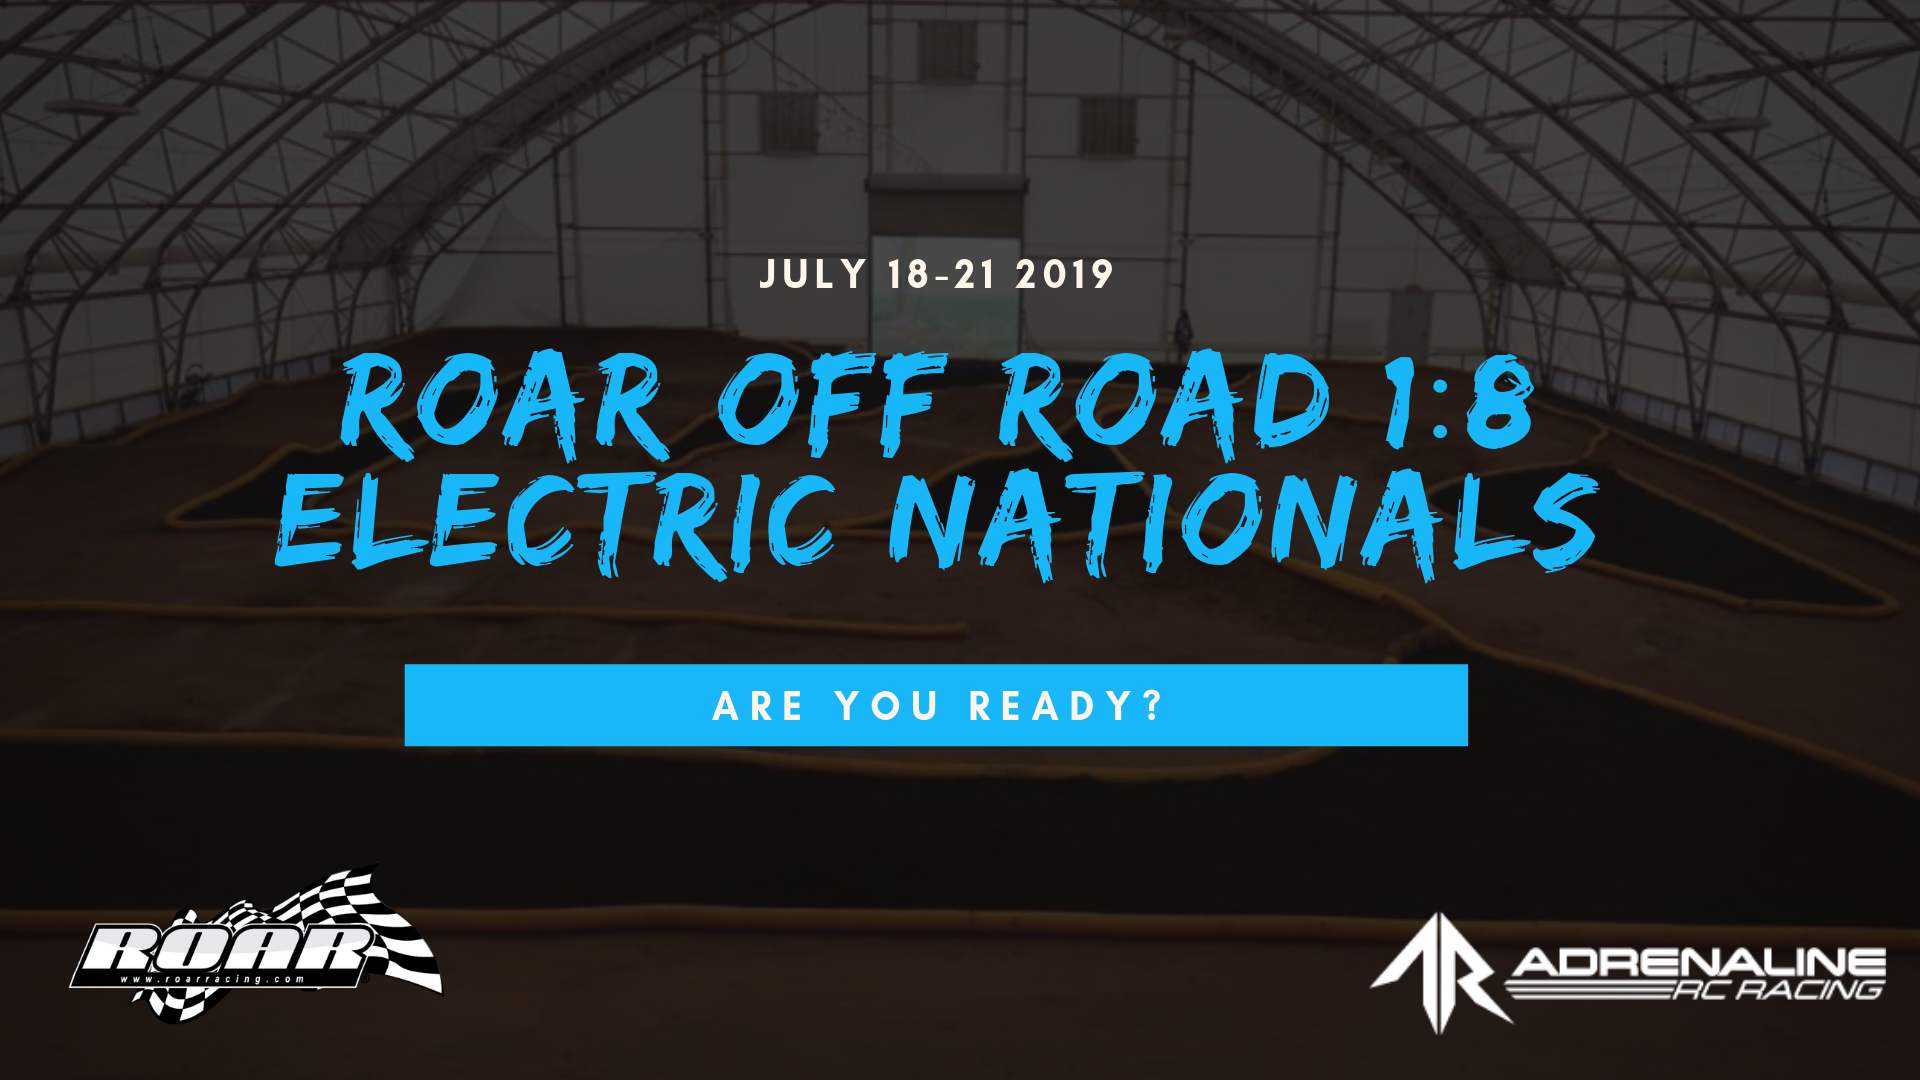 2019 ROAR 1:8 OFF ROAD ELECTRIC NATIONALS GUIDE